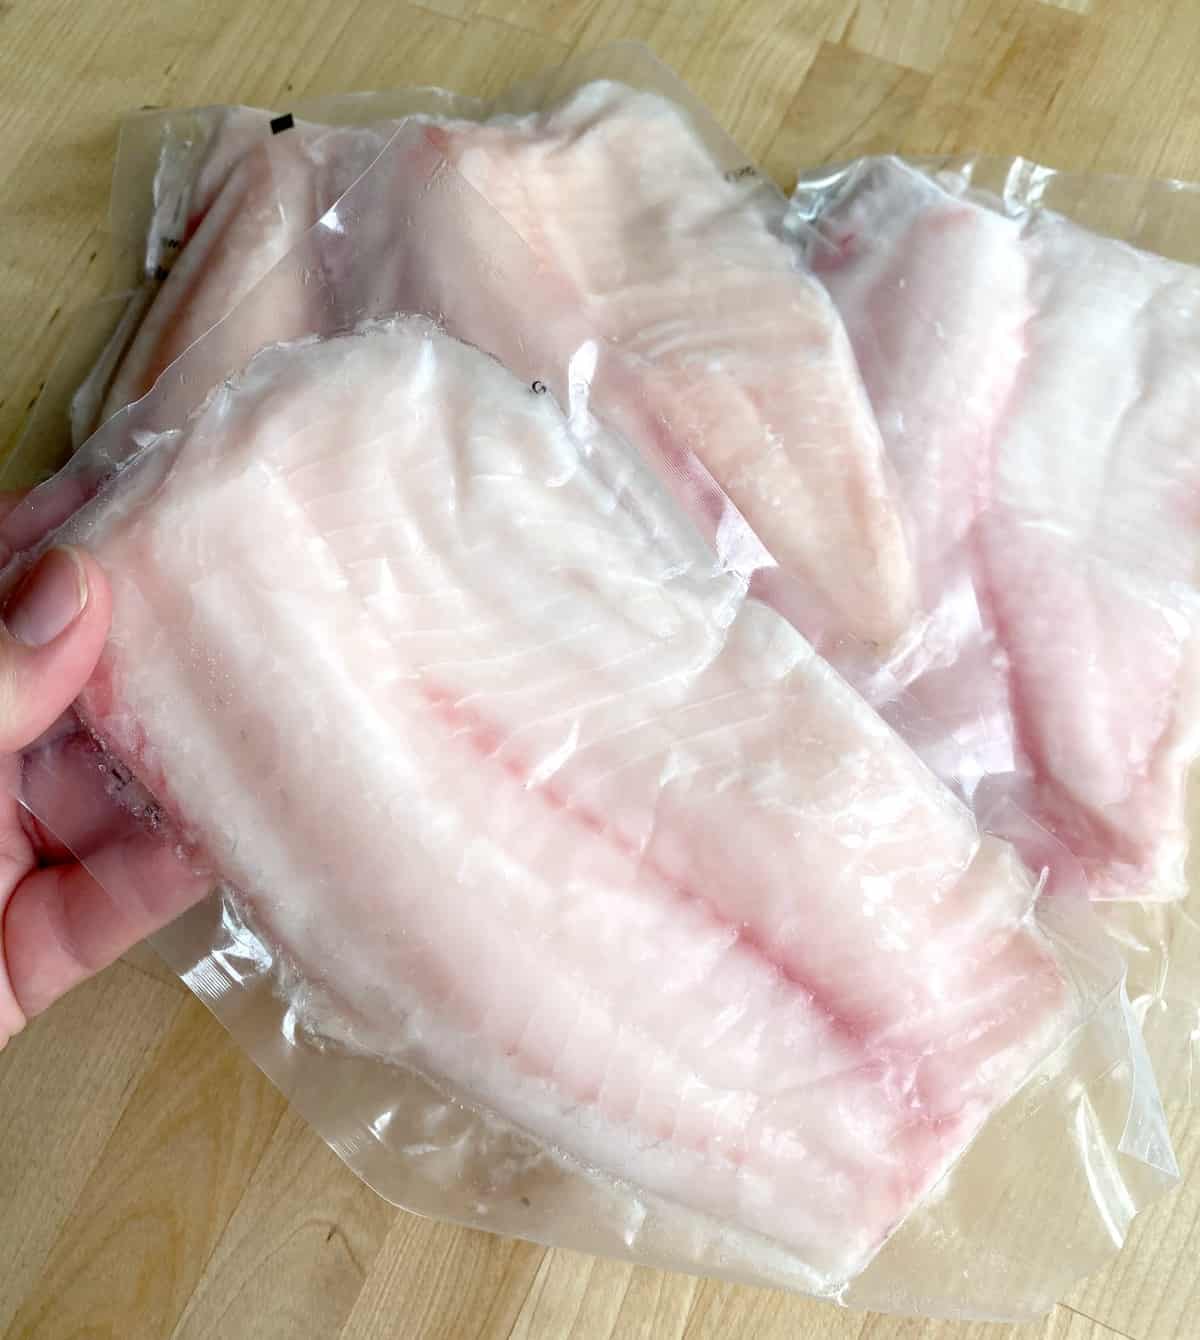 Hand holding a vacuum sealed package of frozen fish.